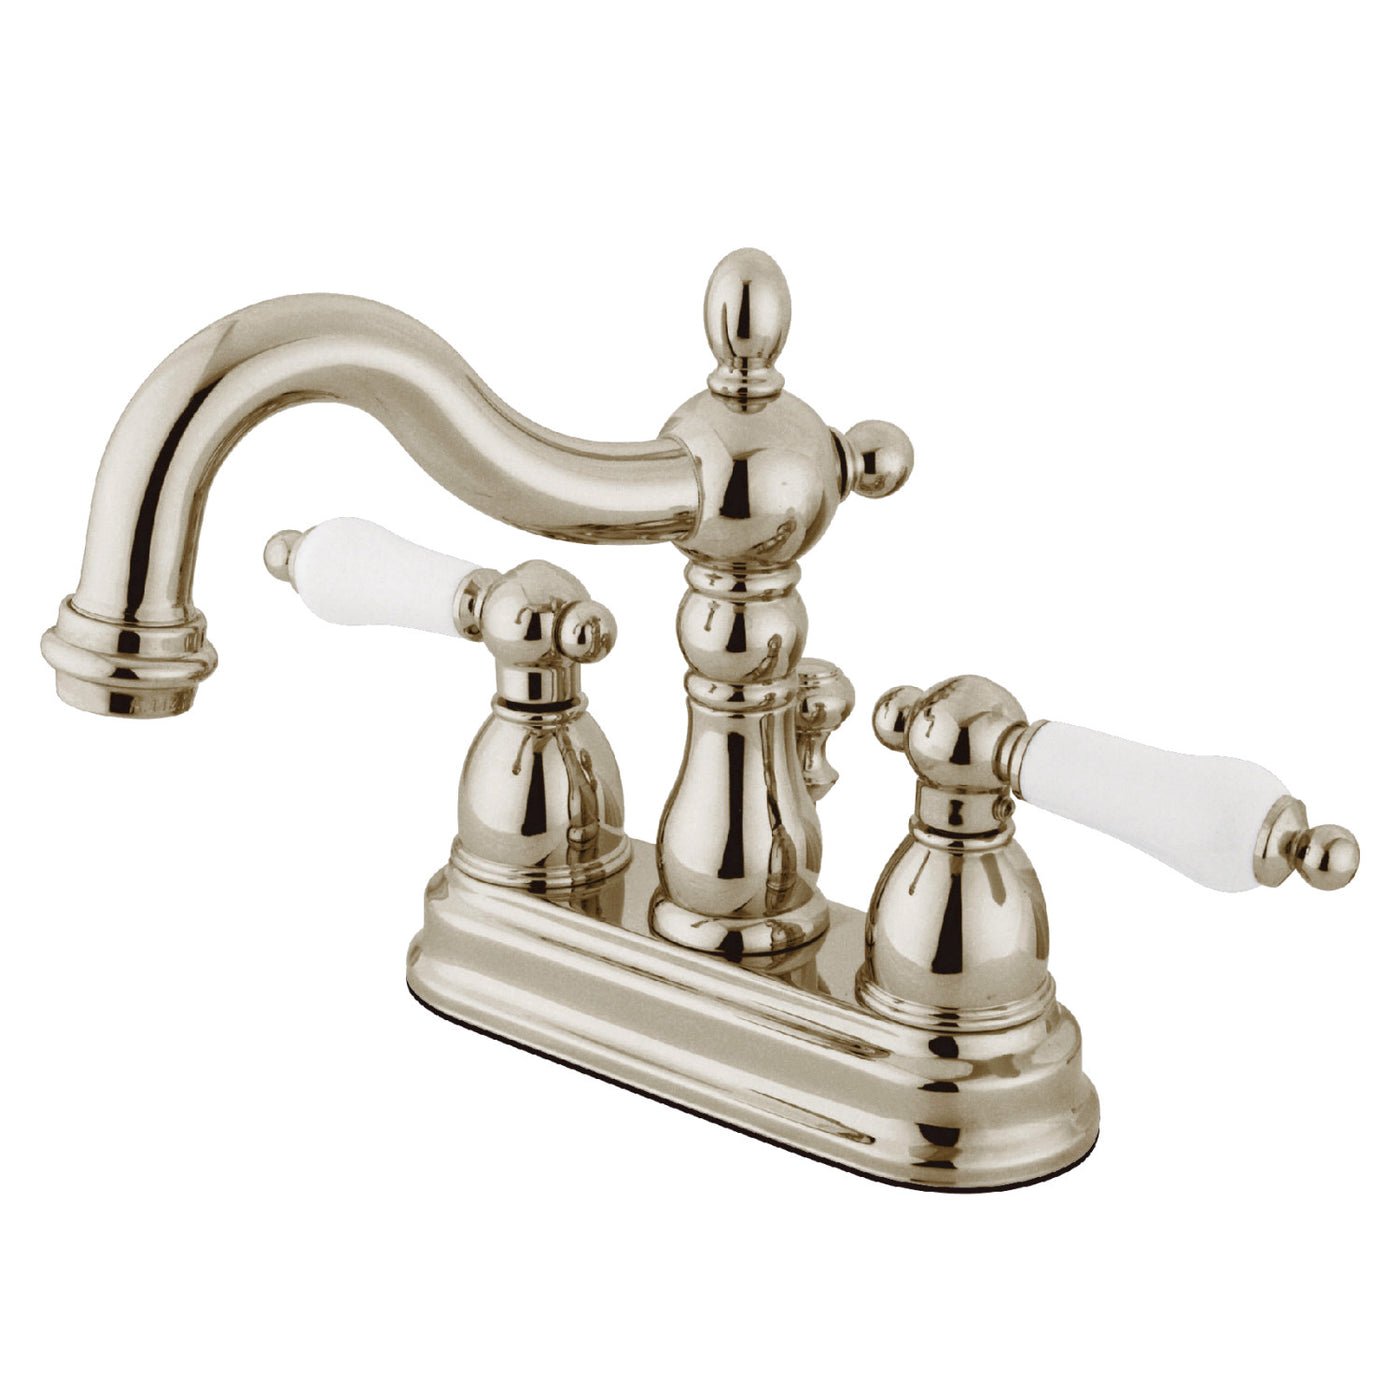 Elements of Design EB1606PL 4-Inch Centerset Bathroom Faucet with Plastic Pop-Up, Polished Nickel